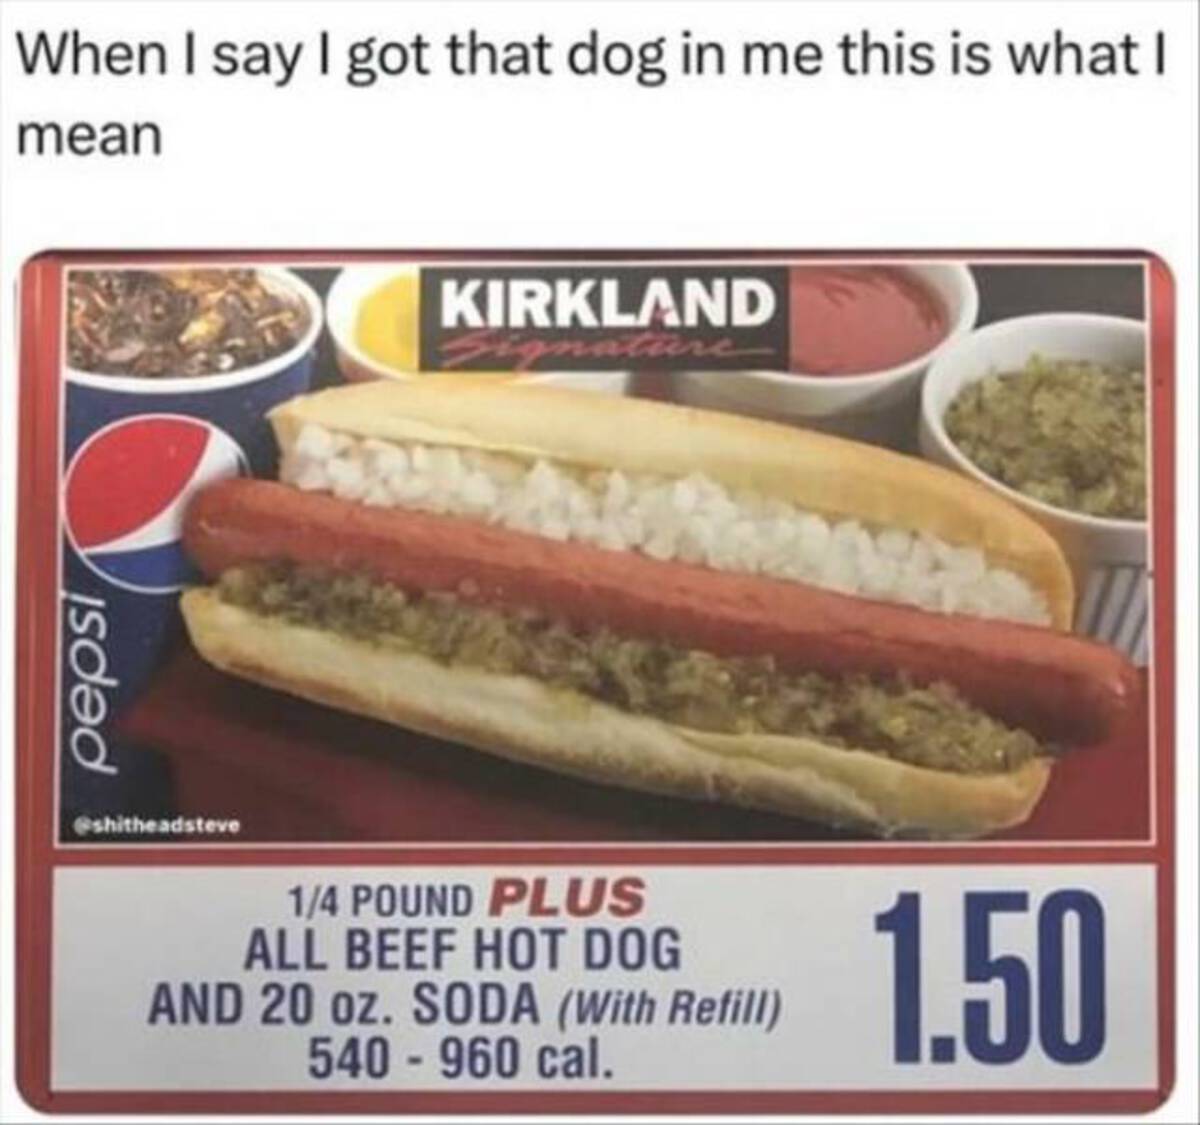 costco hotdog - When I say I got that dog in me this is what I mean isded Kirkland 14 Pound Plus All Beef Hot Dog And 20 oz. Soda With Refill 540 960 cal. 1.50